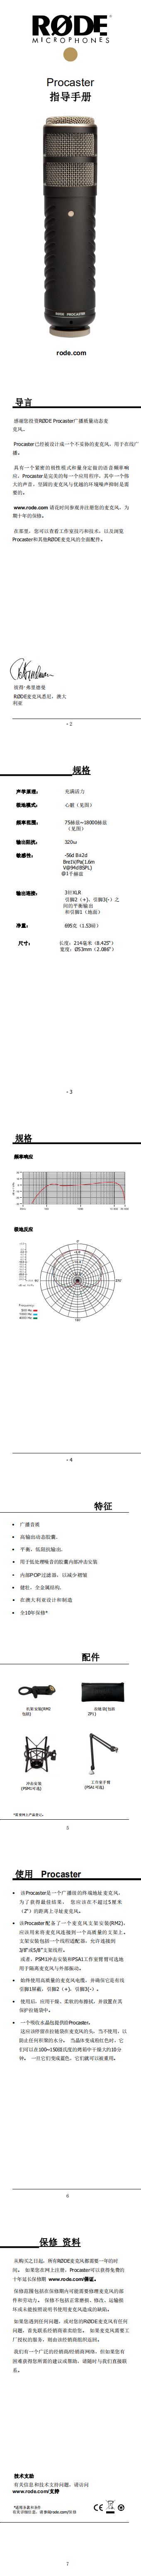 Procaster_product_manual_1_8_translate_Chinese_0.png